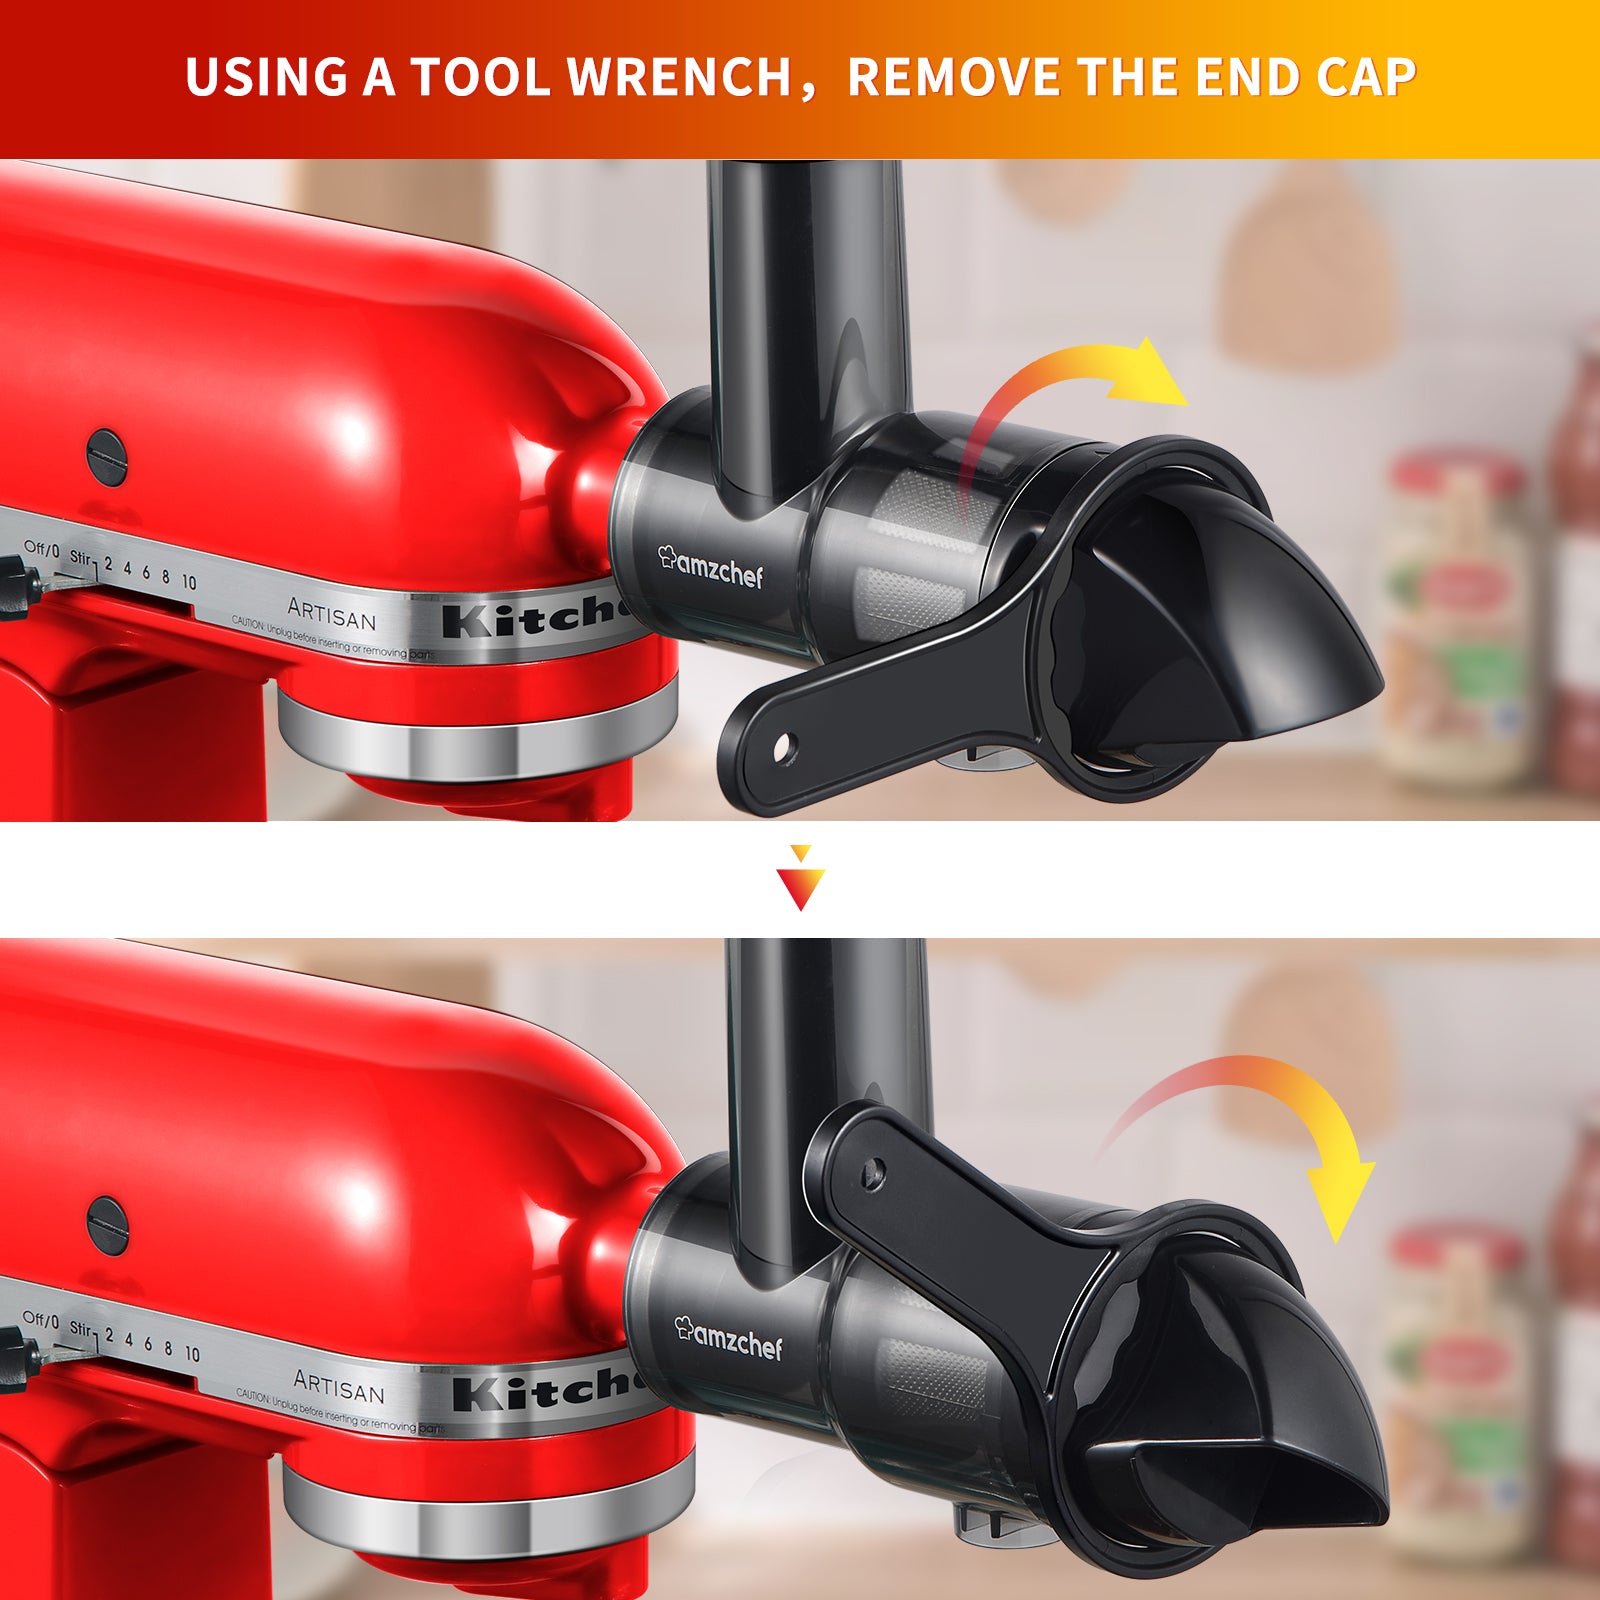 AMZCHEF Slow Masticating Juicer Attachment for KitchenAid Stand Mixers, AMZCHEF Cold Press Juicer Attachment for KitchenAid Mixers, Slow Juicer Attachment with Cleaning Brush, Easy to Clean